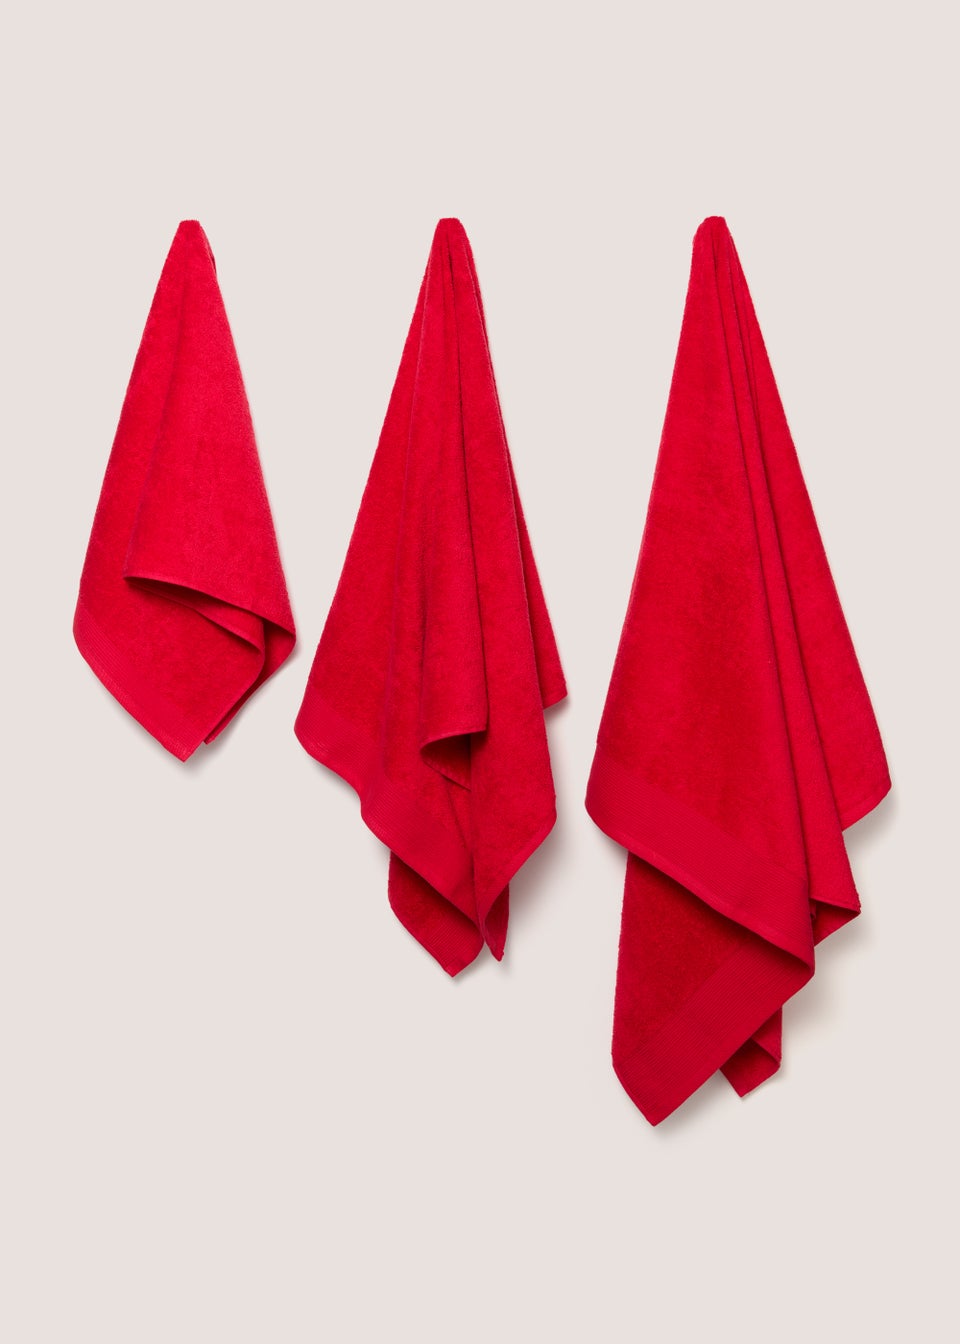 Red Low Twist 100% Cotton Towels